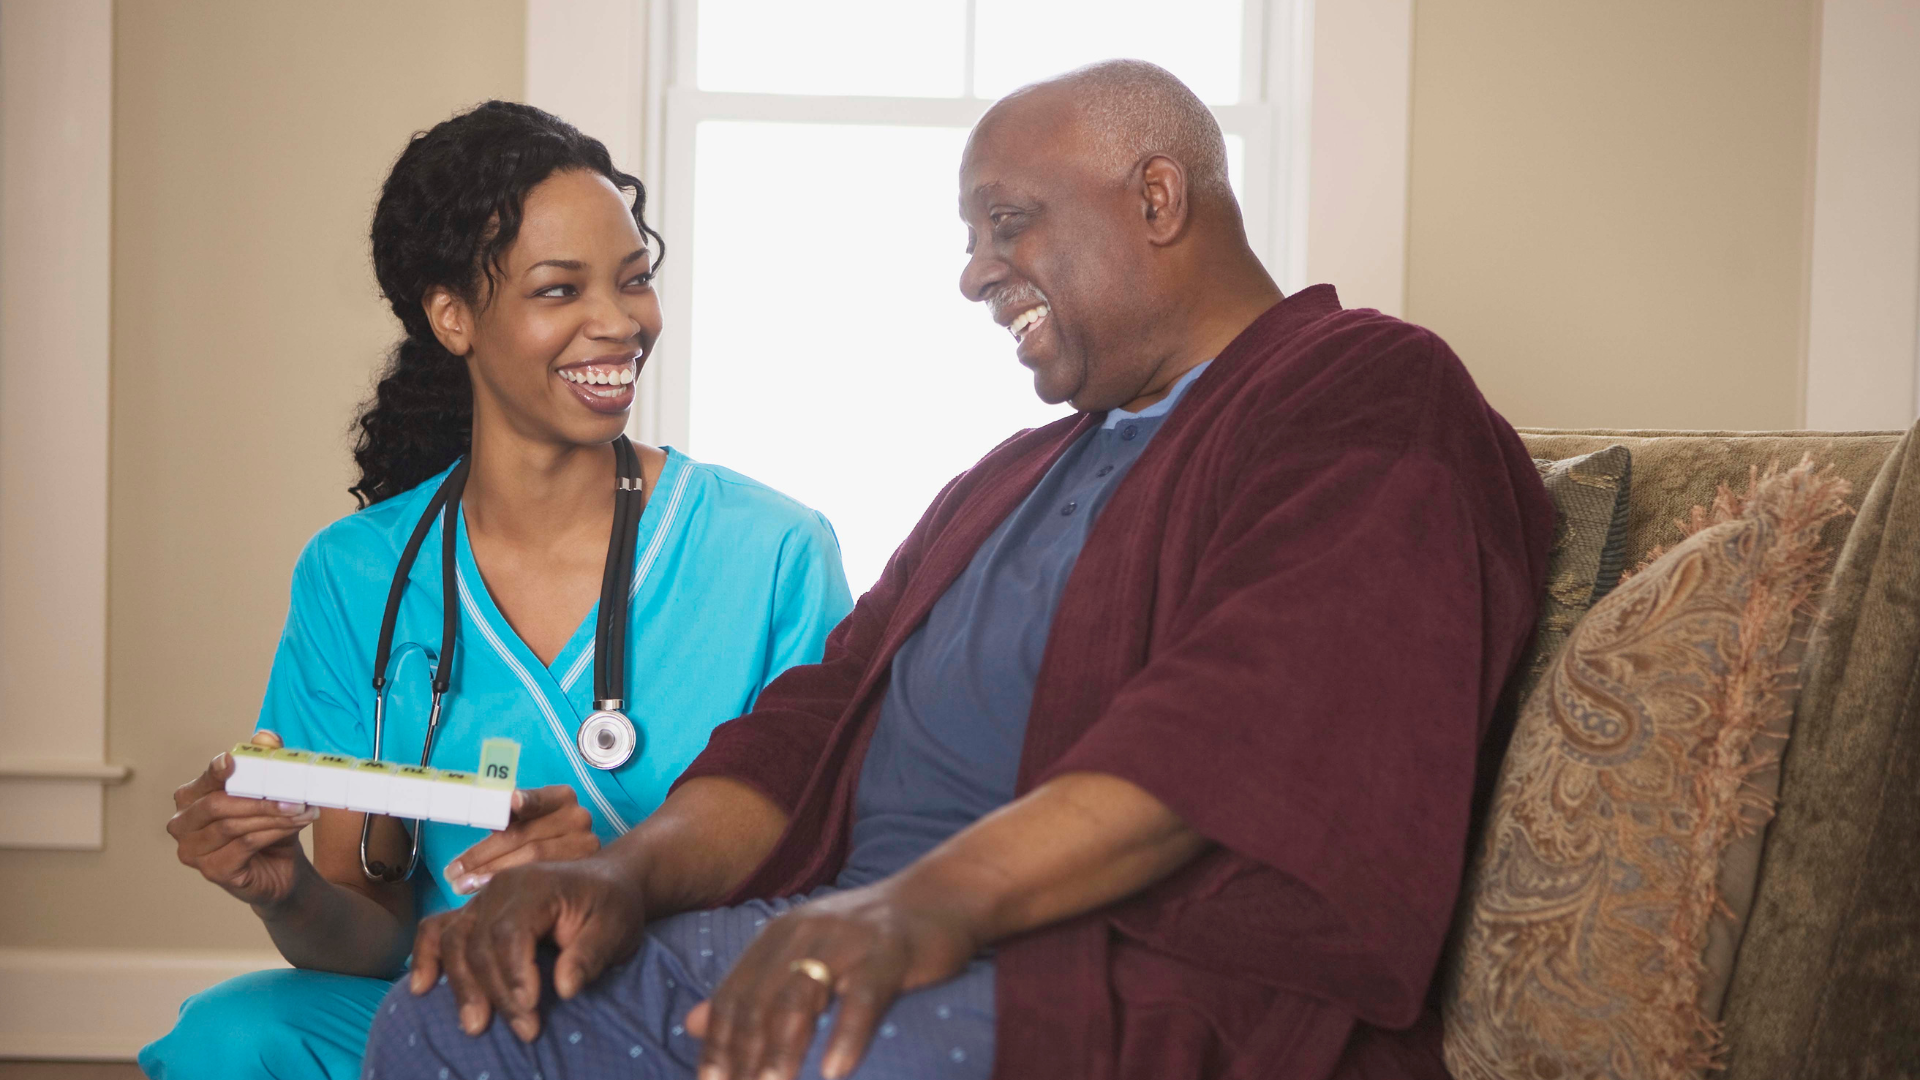 Healthcare staff happily assists a resident with medication pass in long-term care